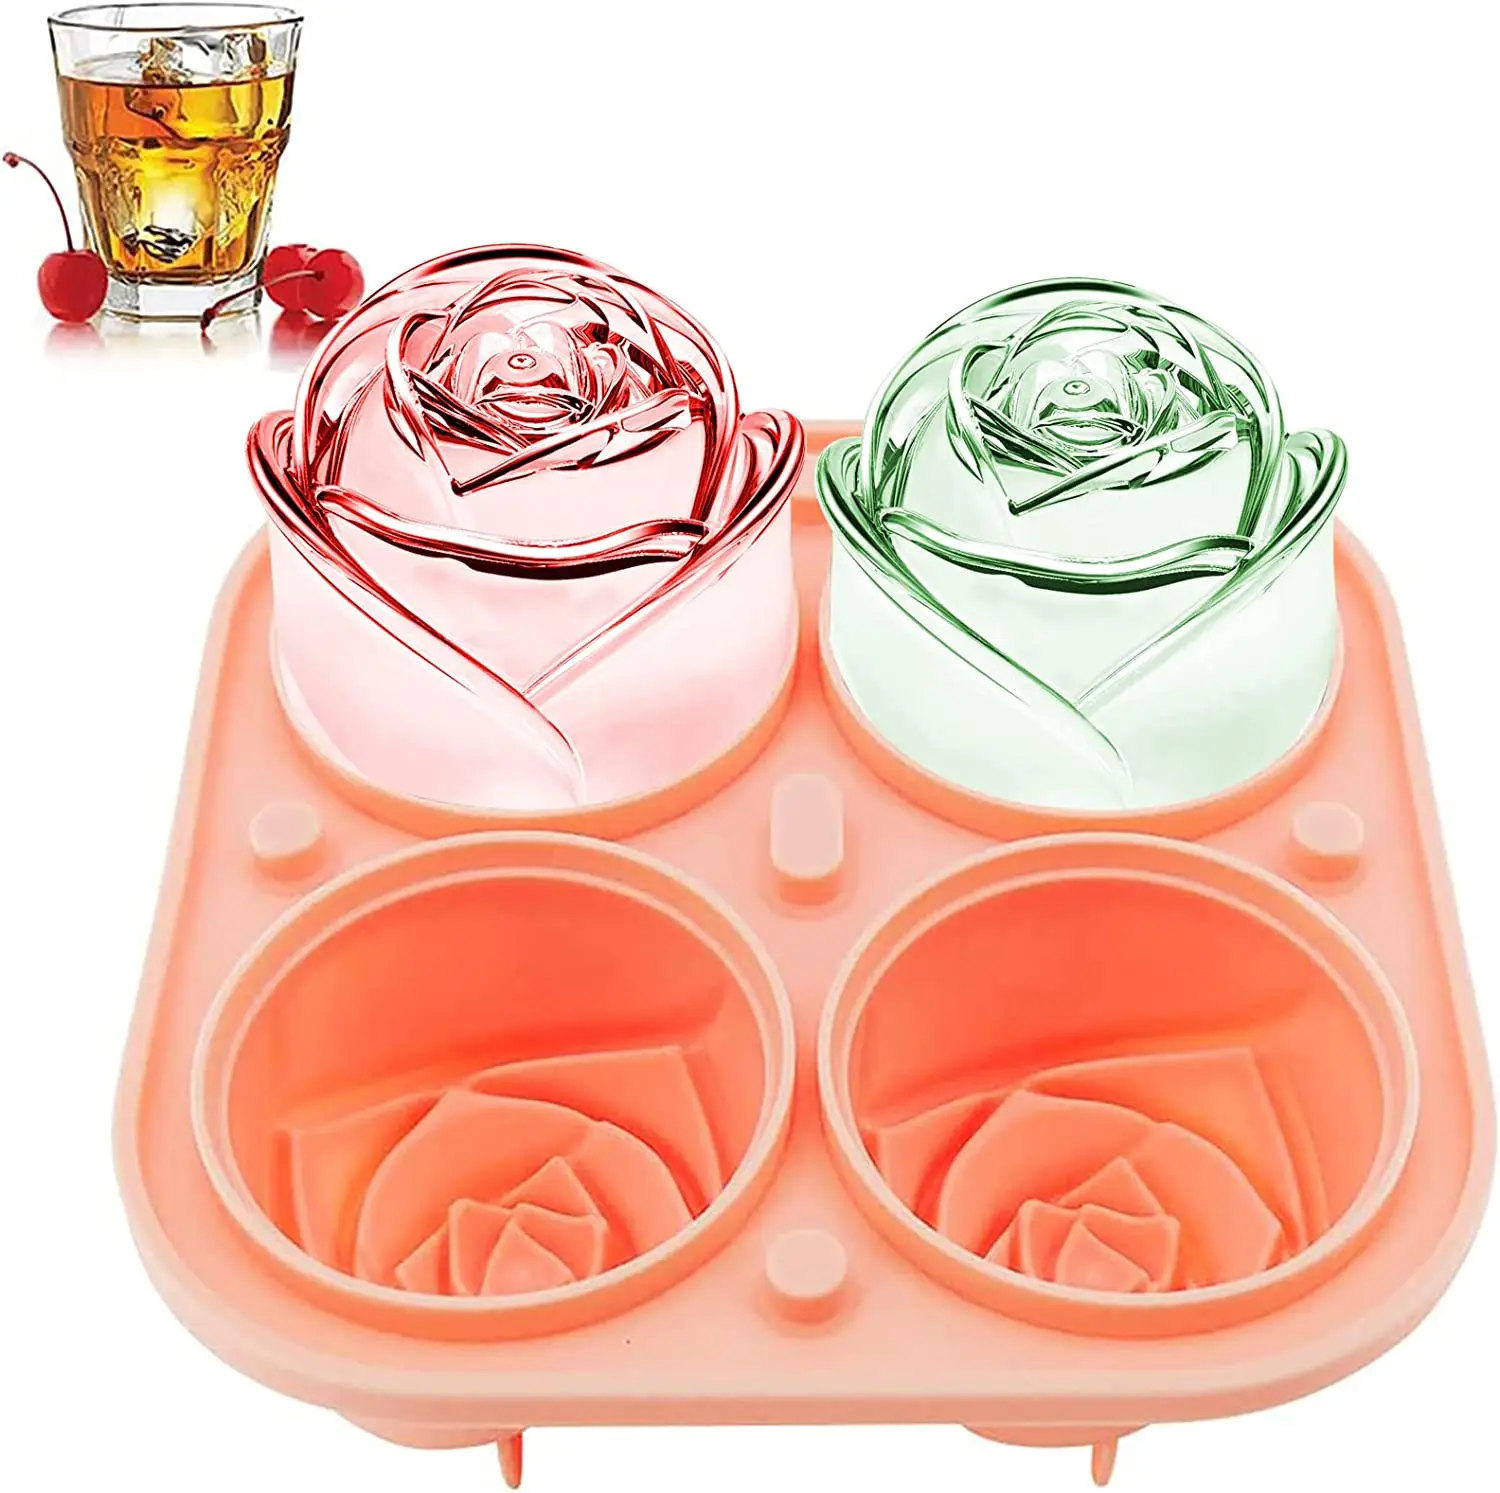 https://ae01.alicdn.com/kf/S71d040104462431b85de2e8f598a05d4e/3D-Rose-Ice-Molds-2-5-Inch-Large-Ice-Cube-Trays-Make-4-Giant-Cute-Flower.jpg